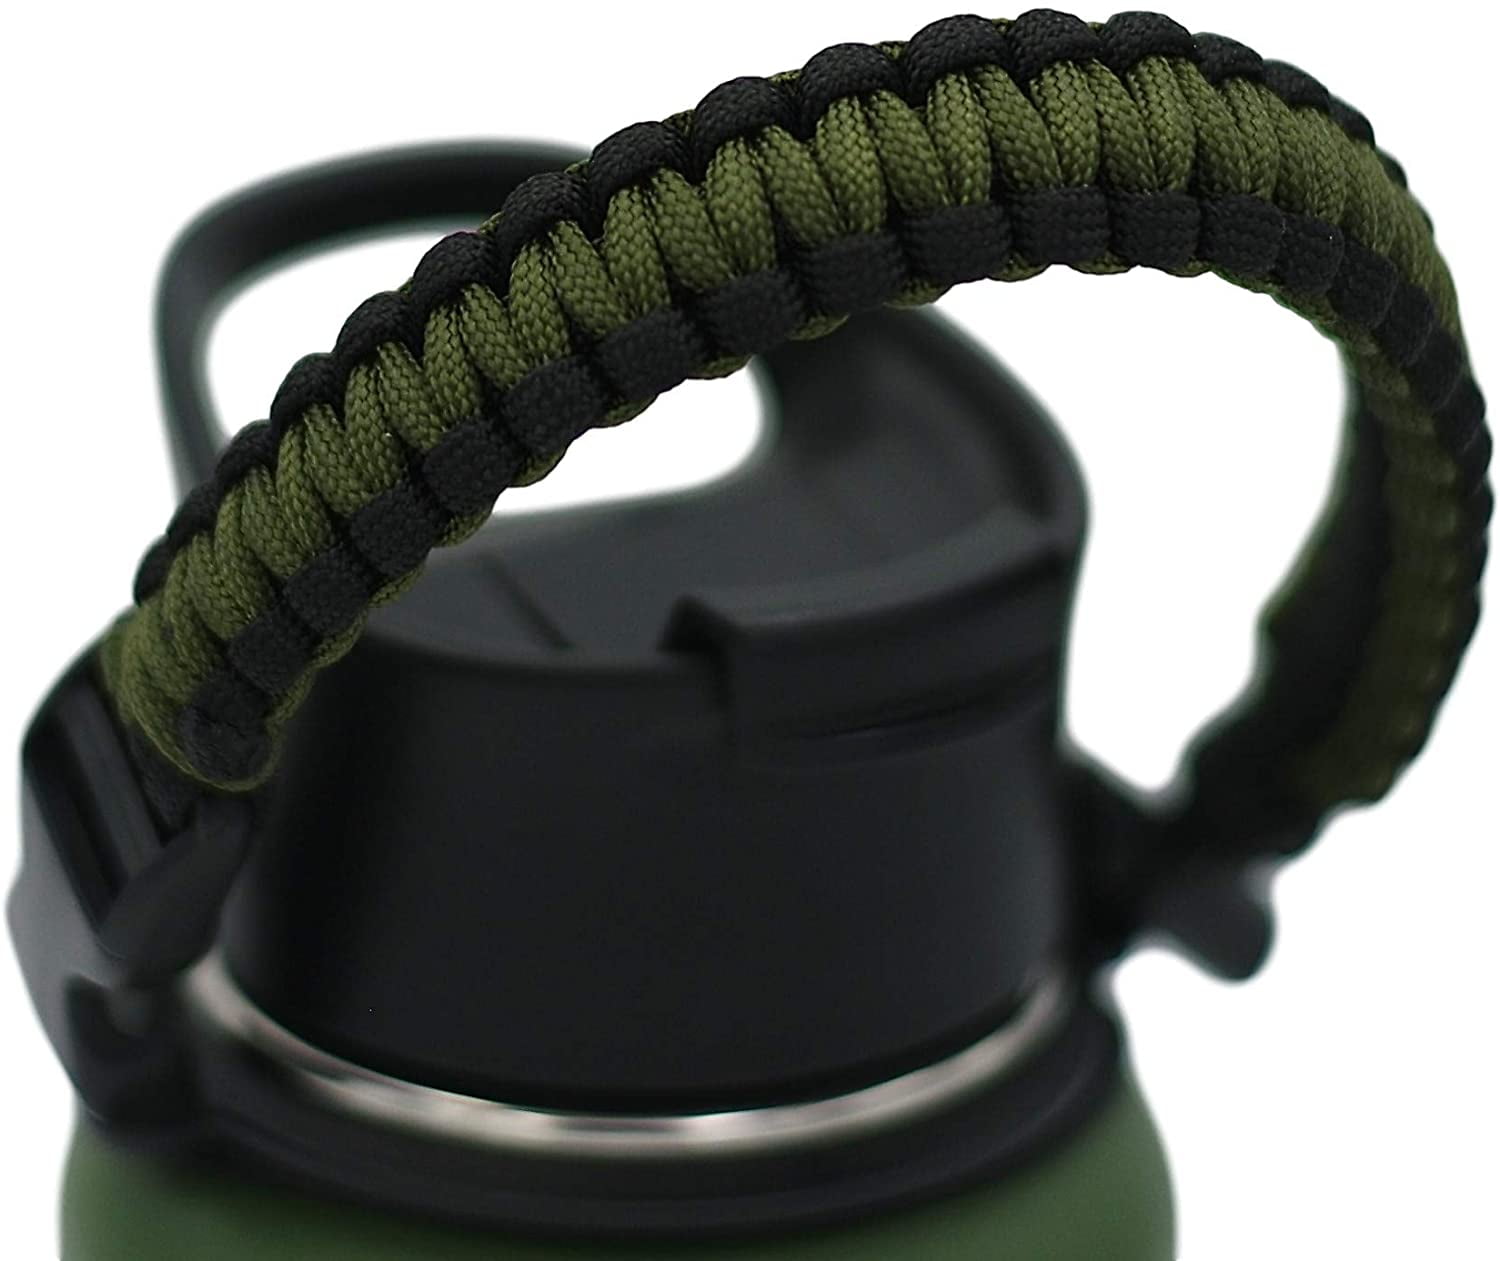 Paracord Handle Compatible with Hydro Flask Wide Mouth Water Bottle, F –  OneMissionX